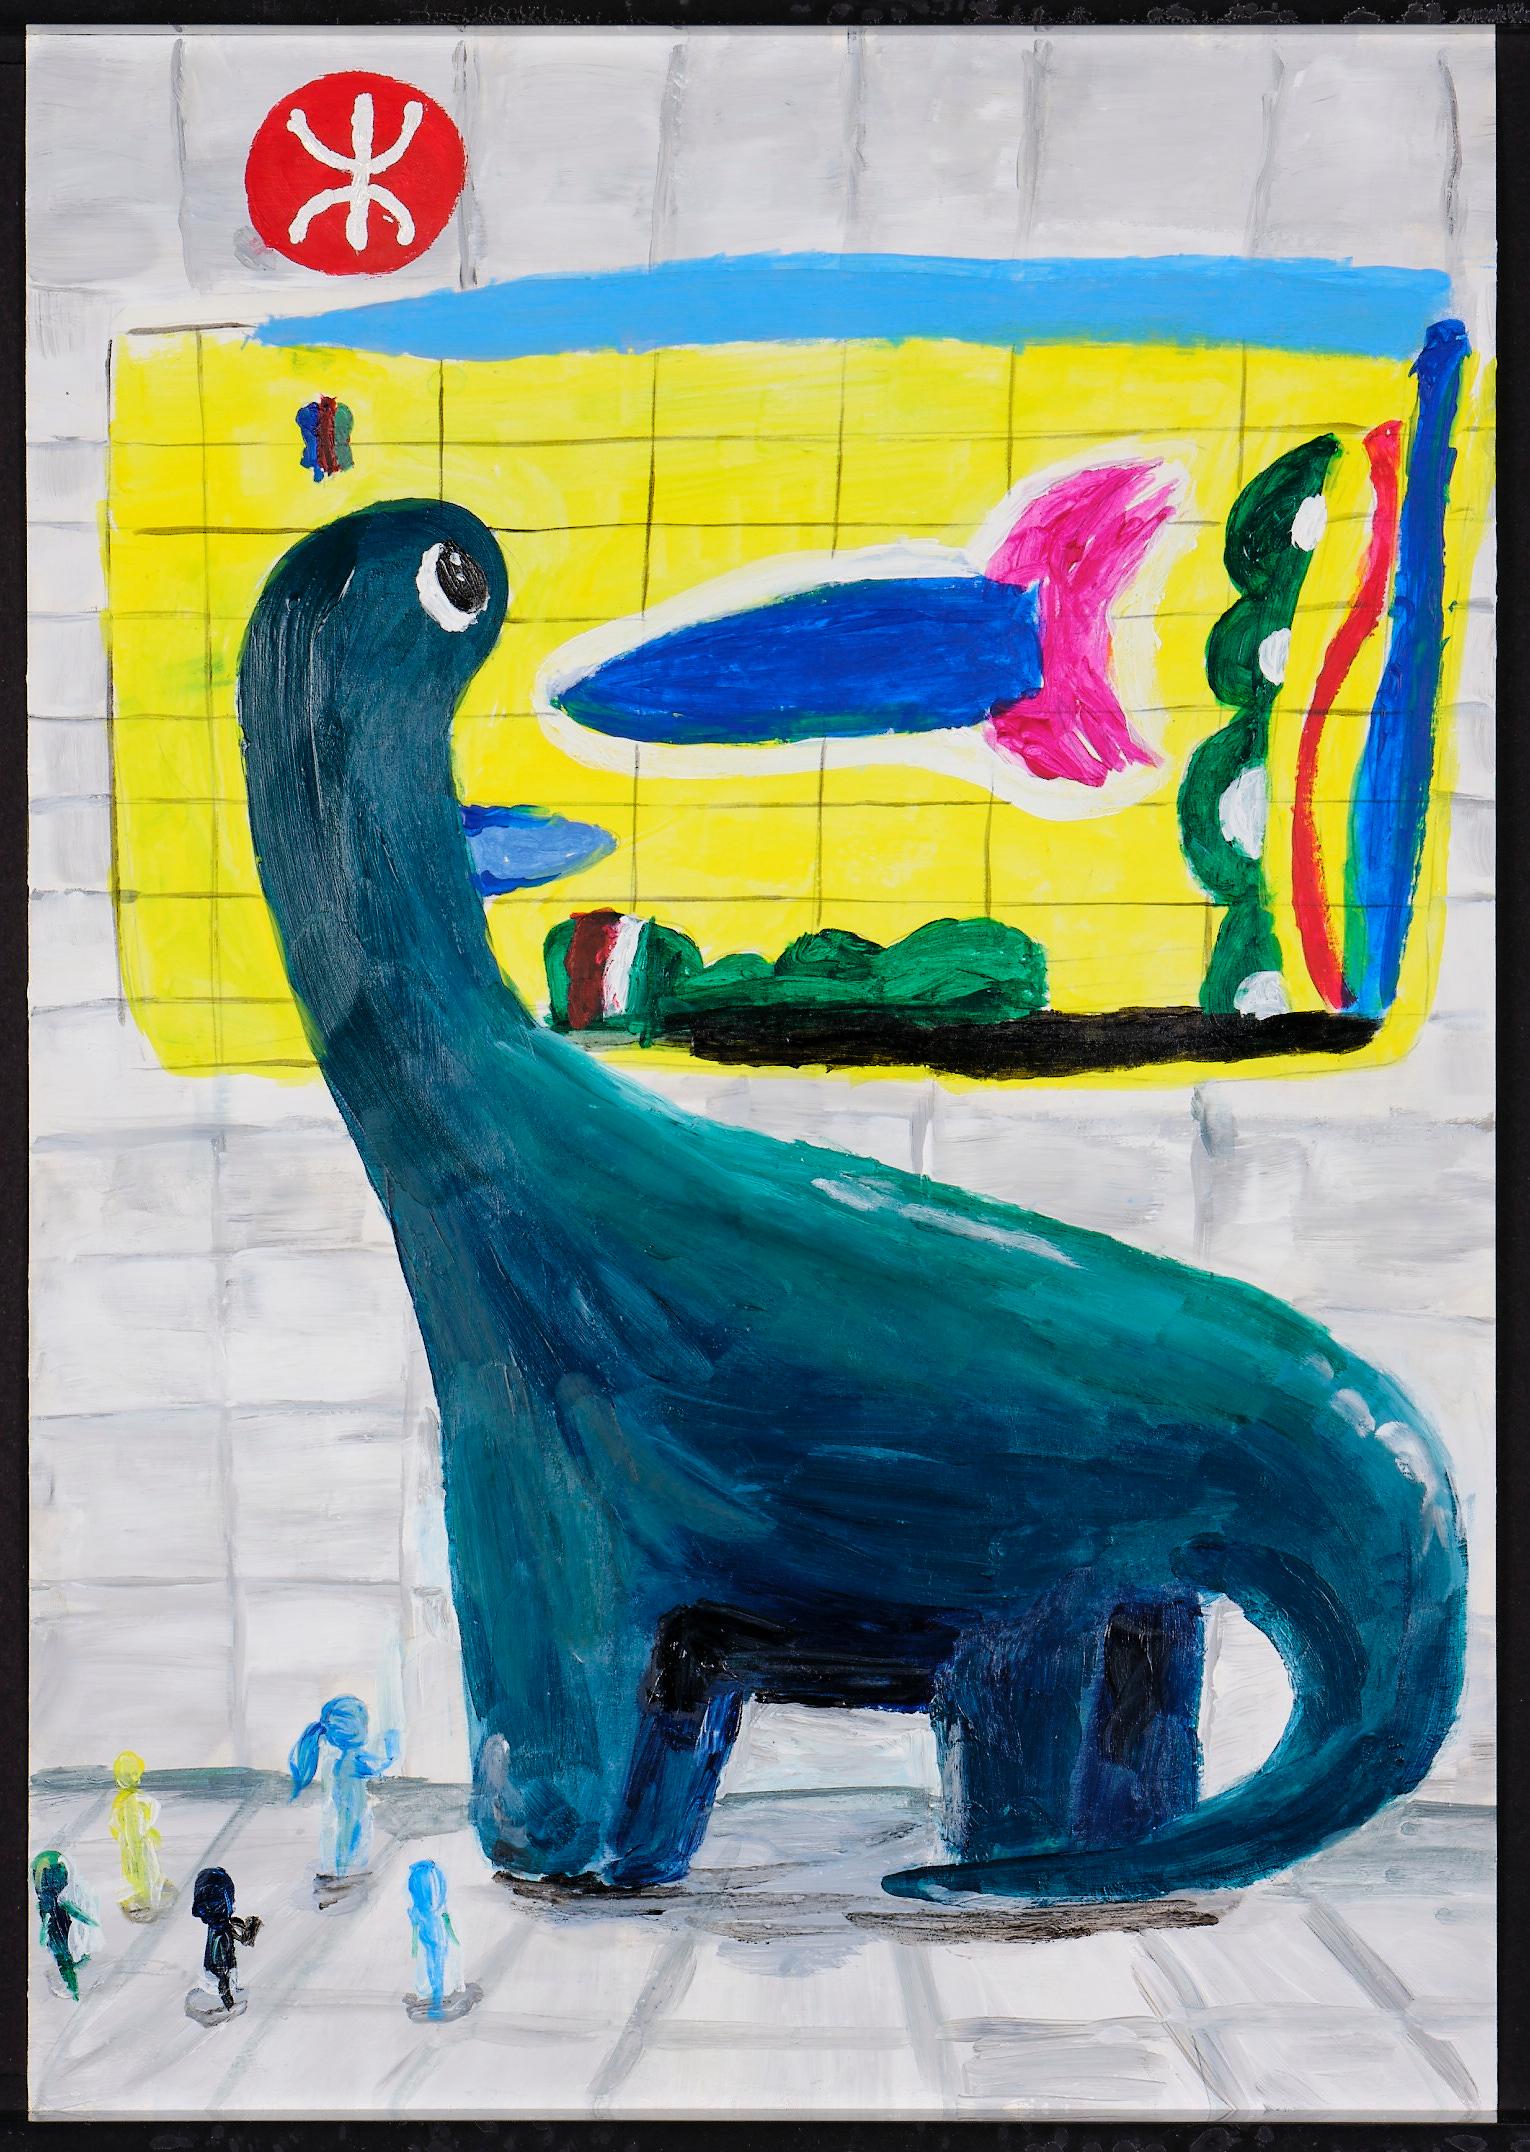 The winning entries of the "MTR x Dinosaur Adventure Art Competition 2022" will be displayed at the Hong Kong Science Museum from August 12 (Friday). Picture shows the artwork of Kwong Hui-ching from S K H Yuen Chen Maun Chen Jubilee Primary School, the champion of the Junior Primary Level under the Painting Category of the competition.